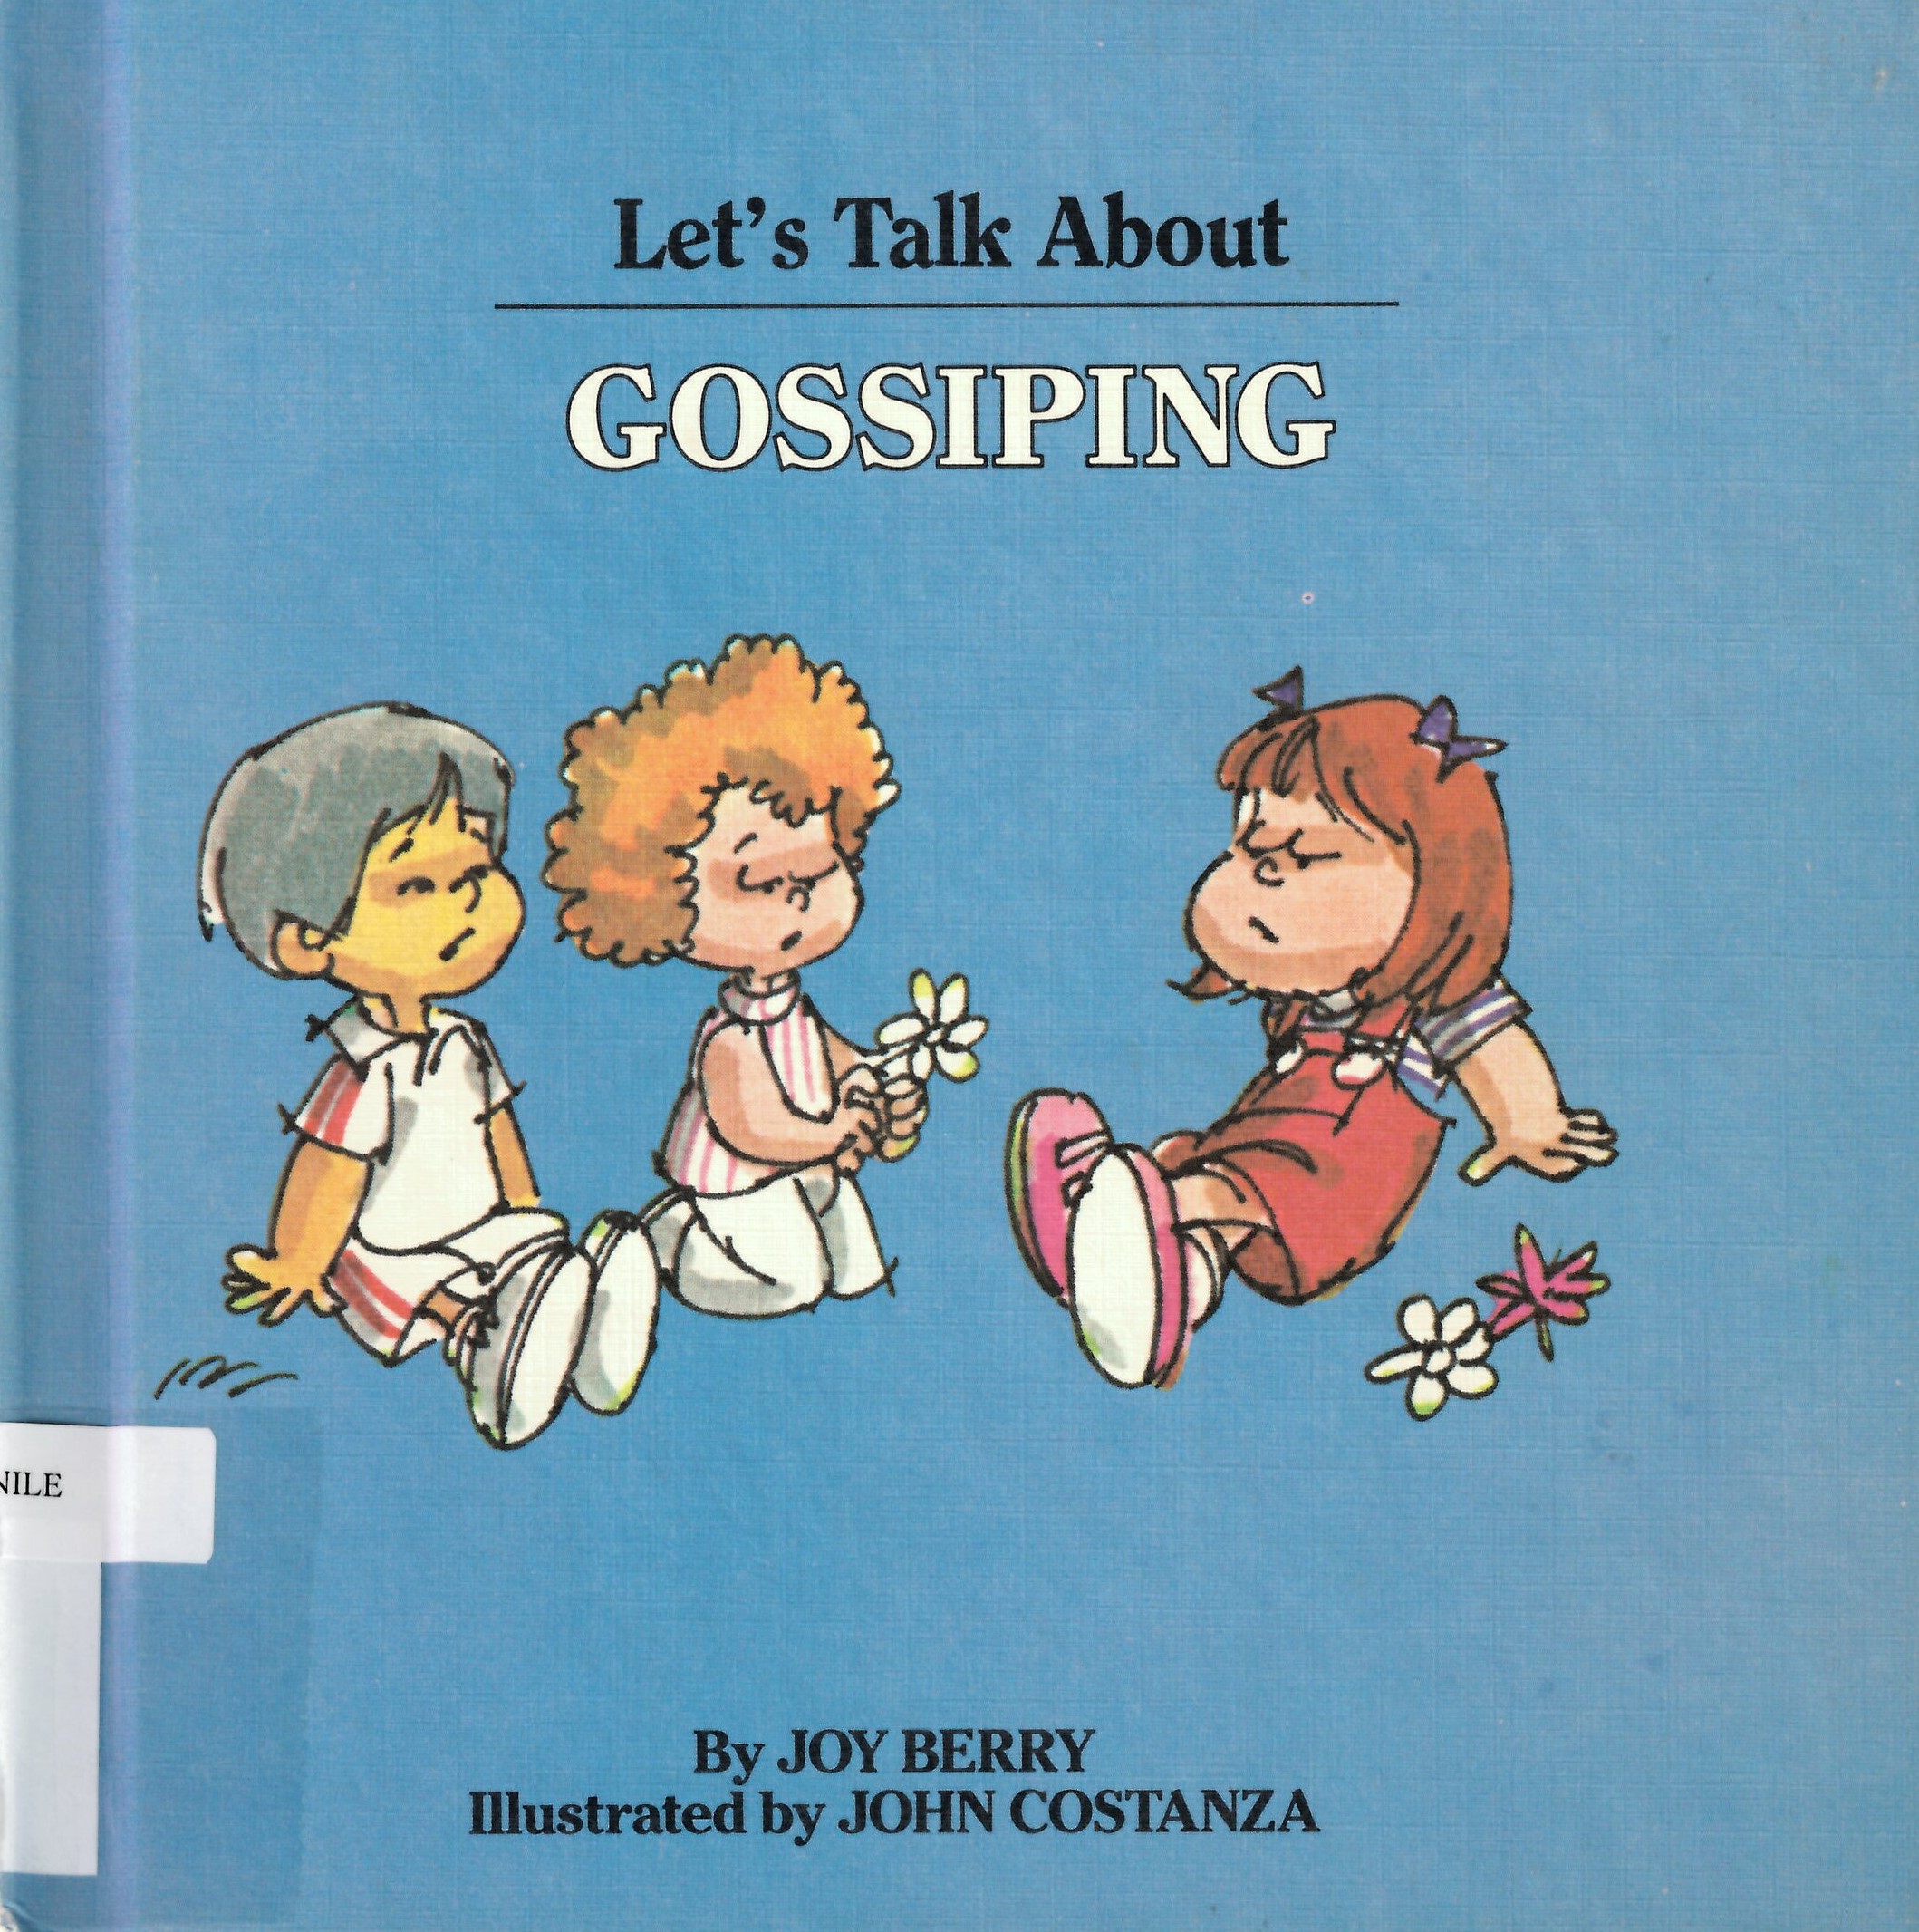 Let's talk about gossiping